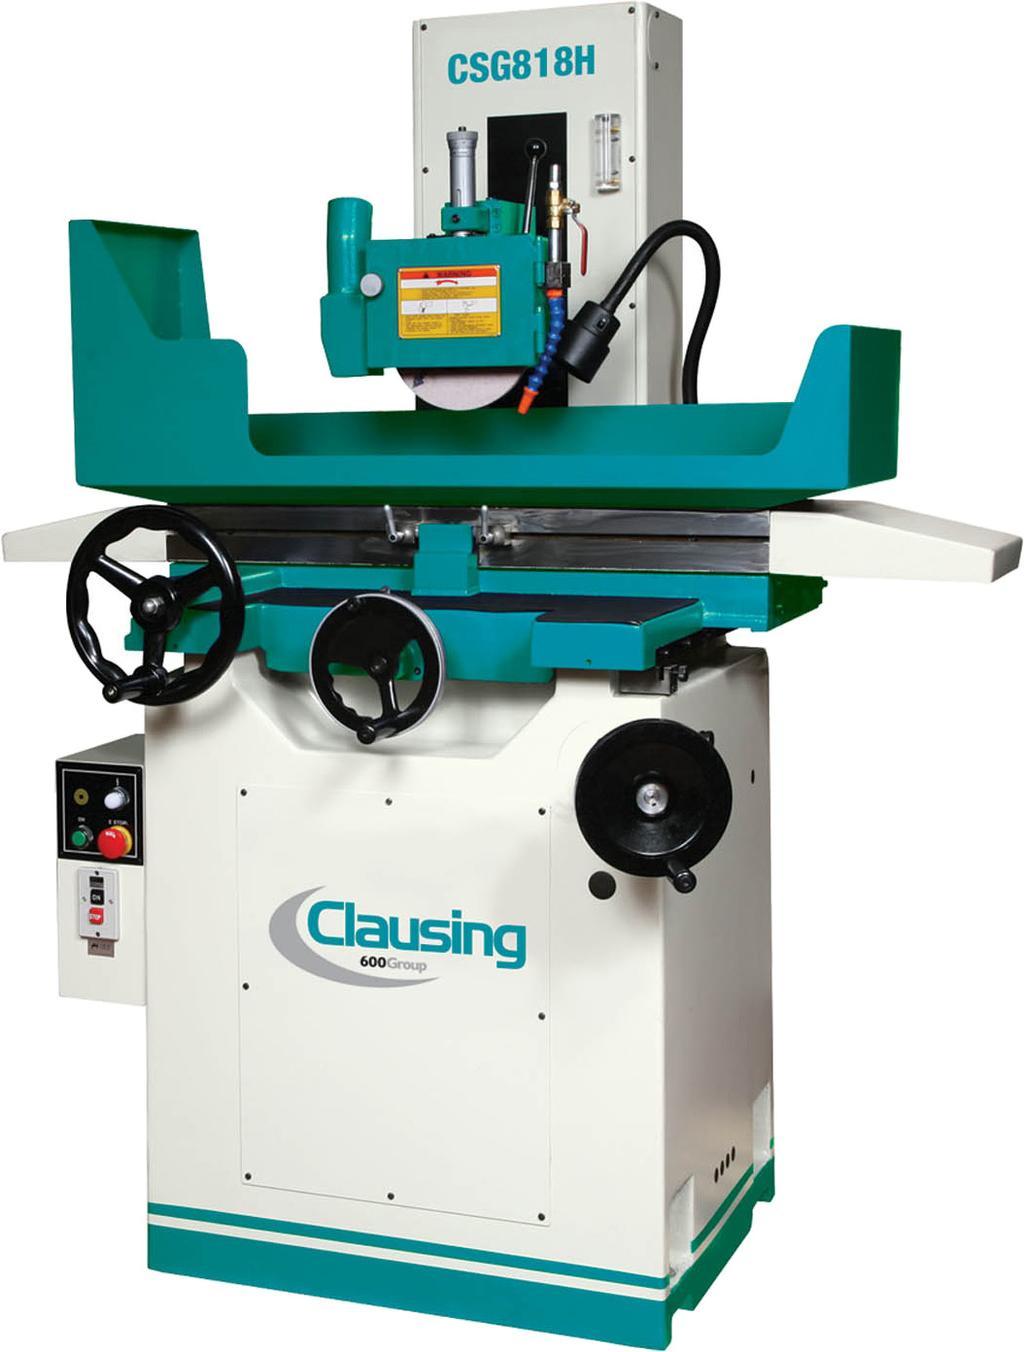 SURFACE GRINDERS PRODUCT CATALOG www.clausing-industrial.com 800.